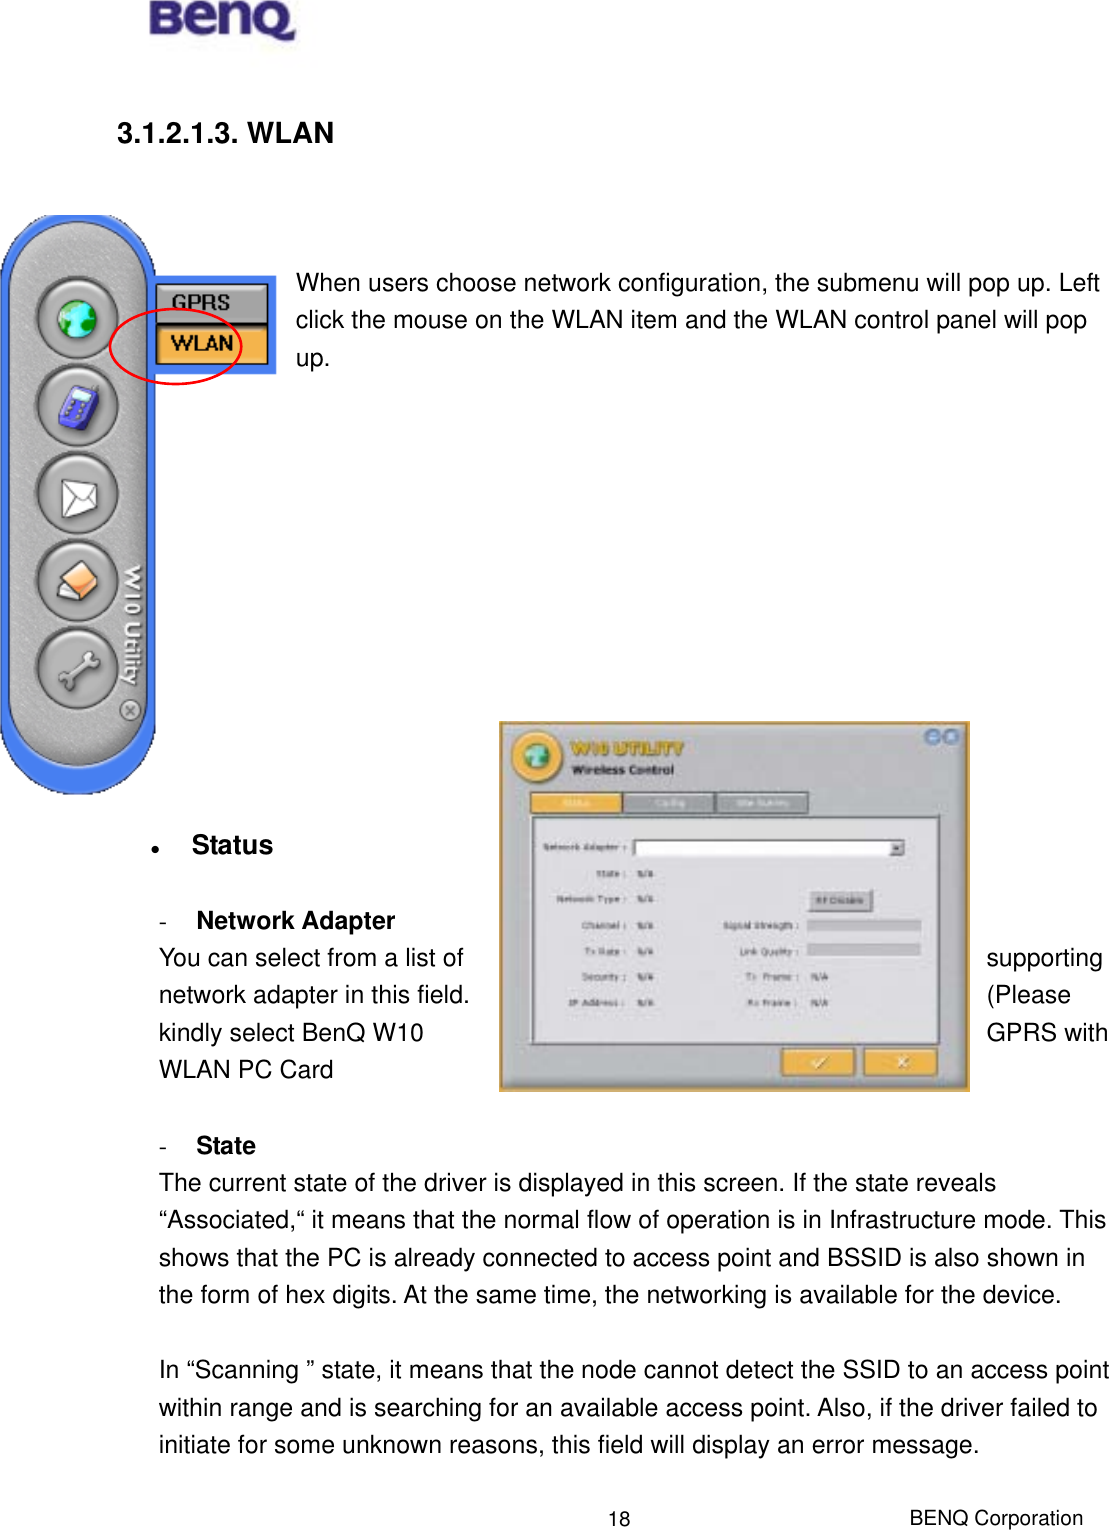  BENQ Corporation 18 3.1.2.1.3. WLAN    When users choose network configuration, the submenu will pop up. Left click the mouse on the WLAN item and the WLAN control panel will pop up.               Status  -  Network Adapter You can select from a list of  supporting network adapter in this field.  (Please kindly select BenQ W10  GPRS with WLAN PC Card  -  State The current state of the driver is displayed in this screen. If the state reveals “Associated,“ it means that the normal flow of operation is in Infrastructure mode. This shows that the PC is already connected to access point and BSSID is also shown in the form of hex digits. At the same time, the networking is available for the device.  In “Scanning ” state, it means that the node cannot detect the SSID to an access point within range and is searching for an available access point. Also, if the driver failed to initiate for some unknown reasons, this field will display an error message.  